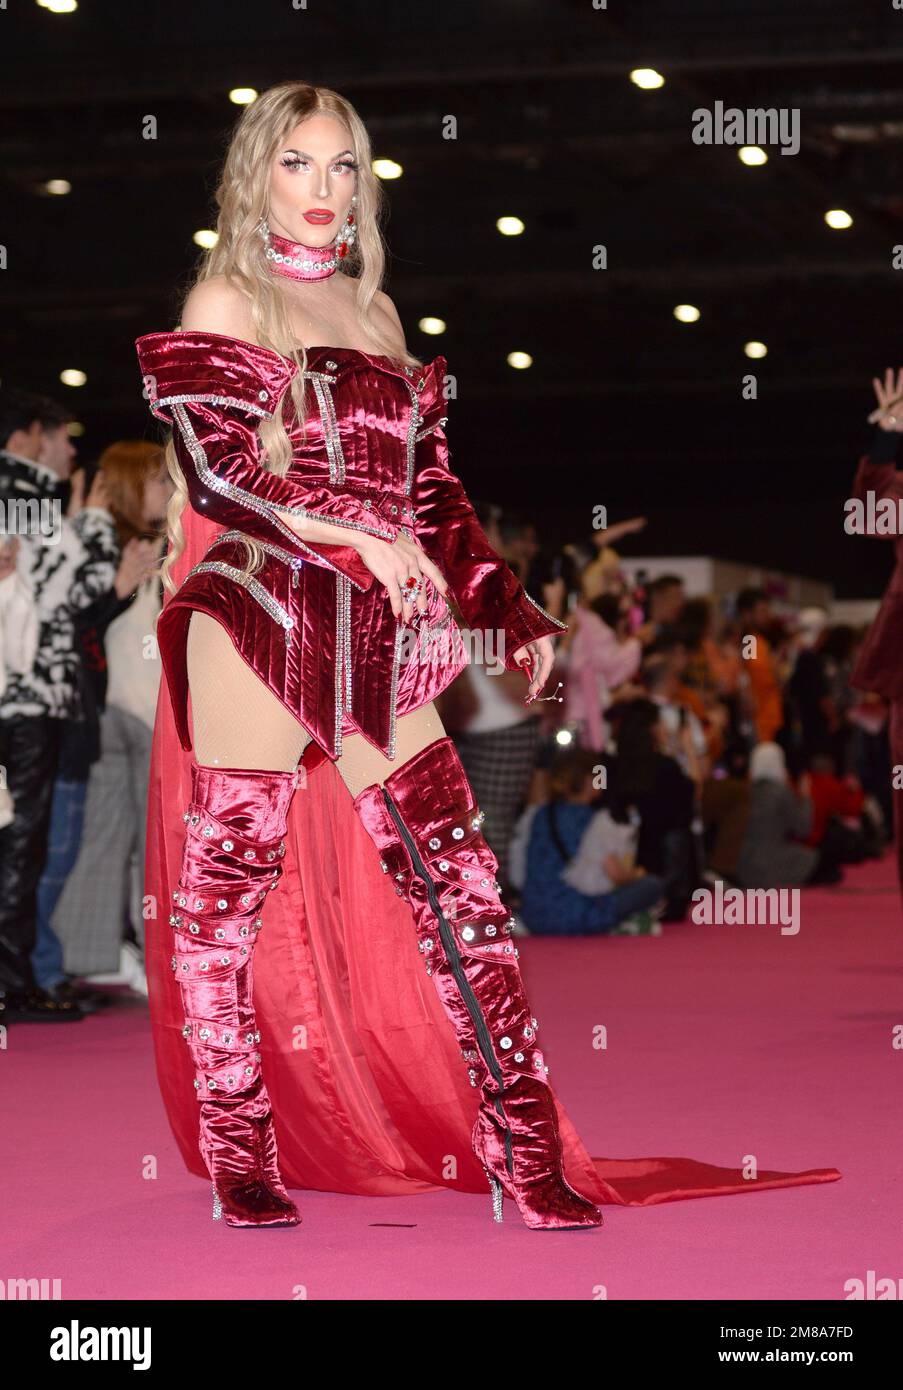 Photo Must Be Credited ©Alpha Press 078237 06/01/2023 Drag Queen at RuPaul DragCon UK held at Excel London. Stock Photo